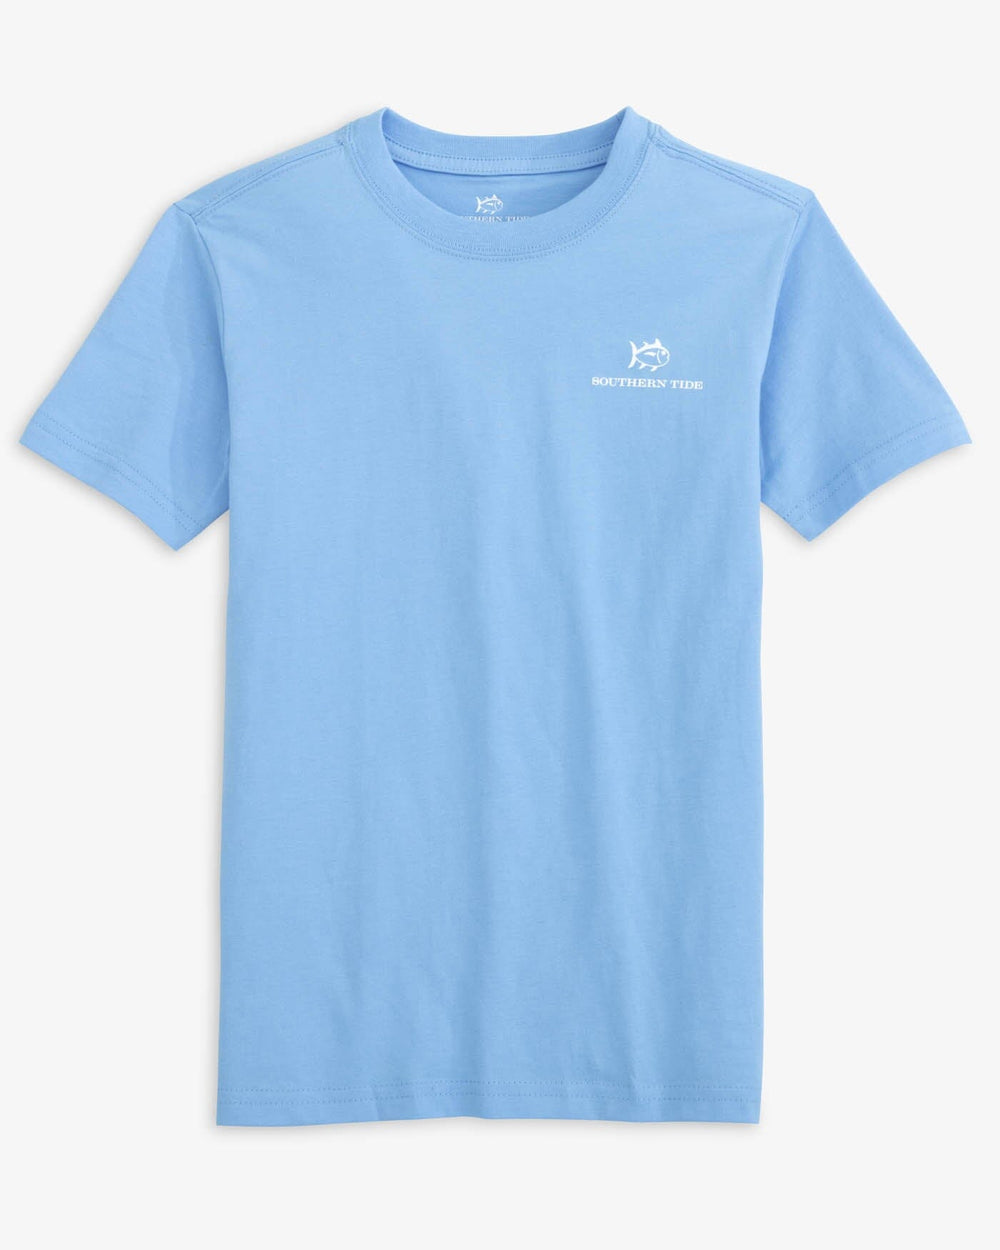 The front view of the Southern Tide Youth Skipping Jacks Fill T-Shirt by Southern Tide - Ocean Channel